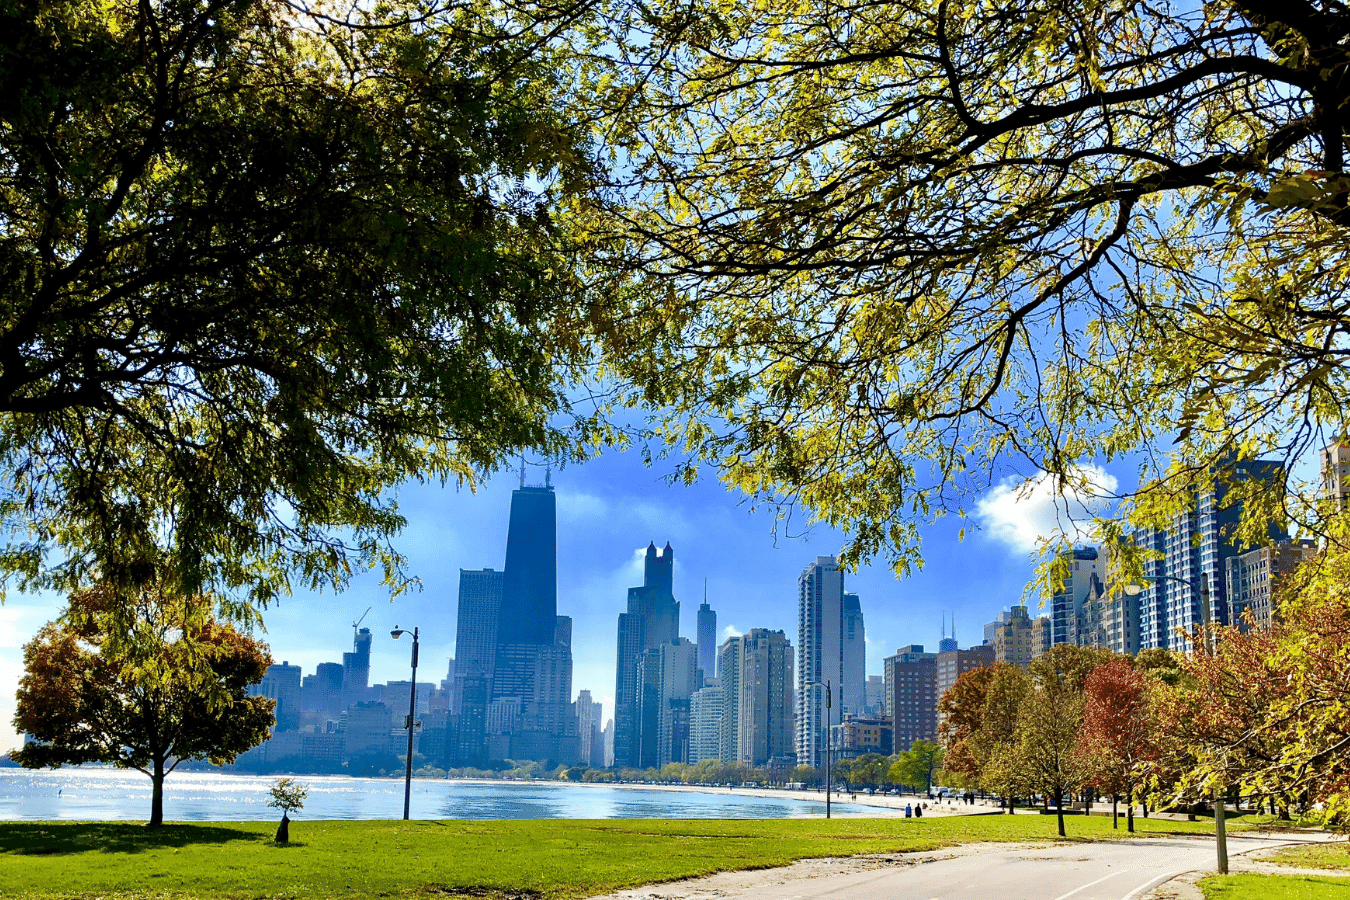 Chicago Illinois park with trees and city skyline in the background